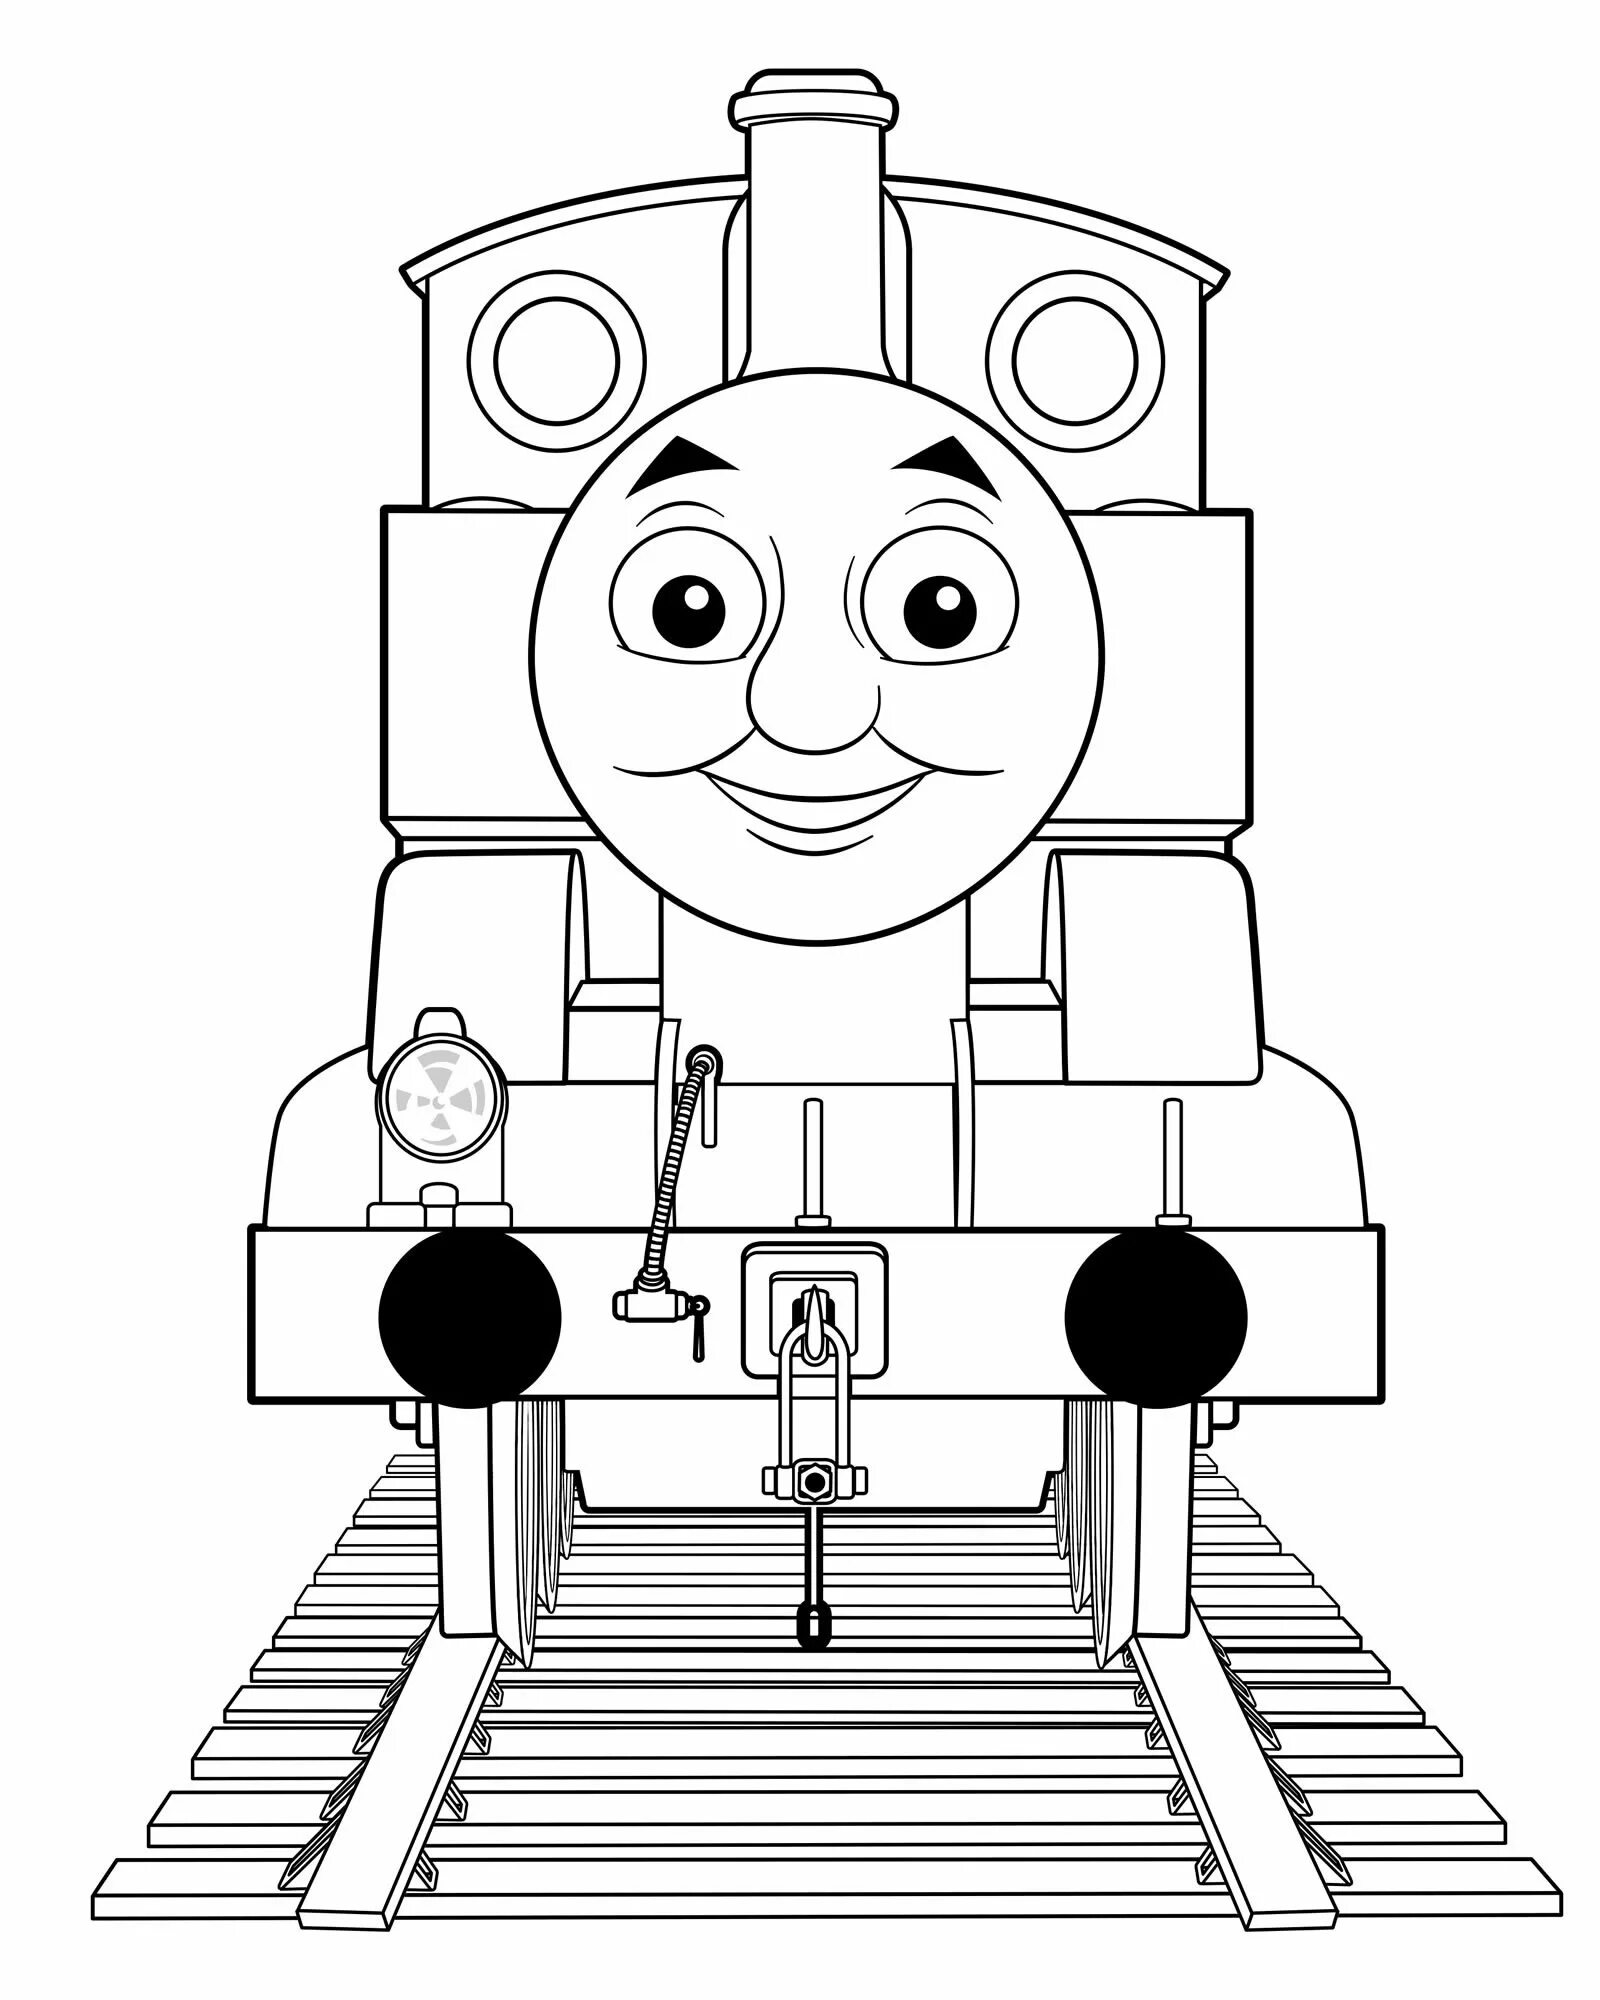 Zany thomas the engine scary coloring page